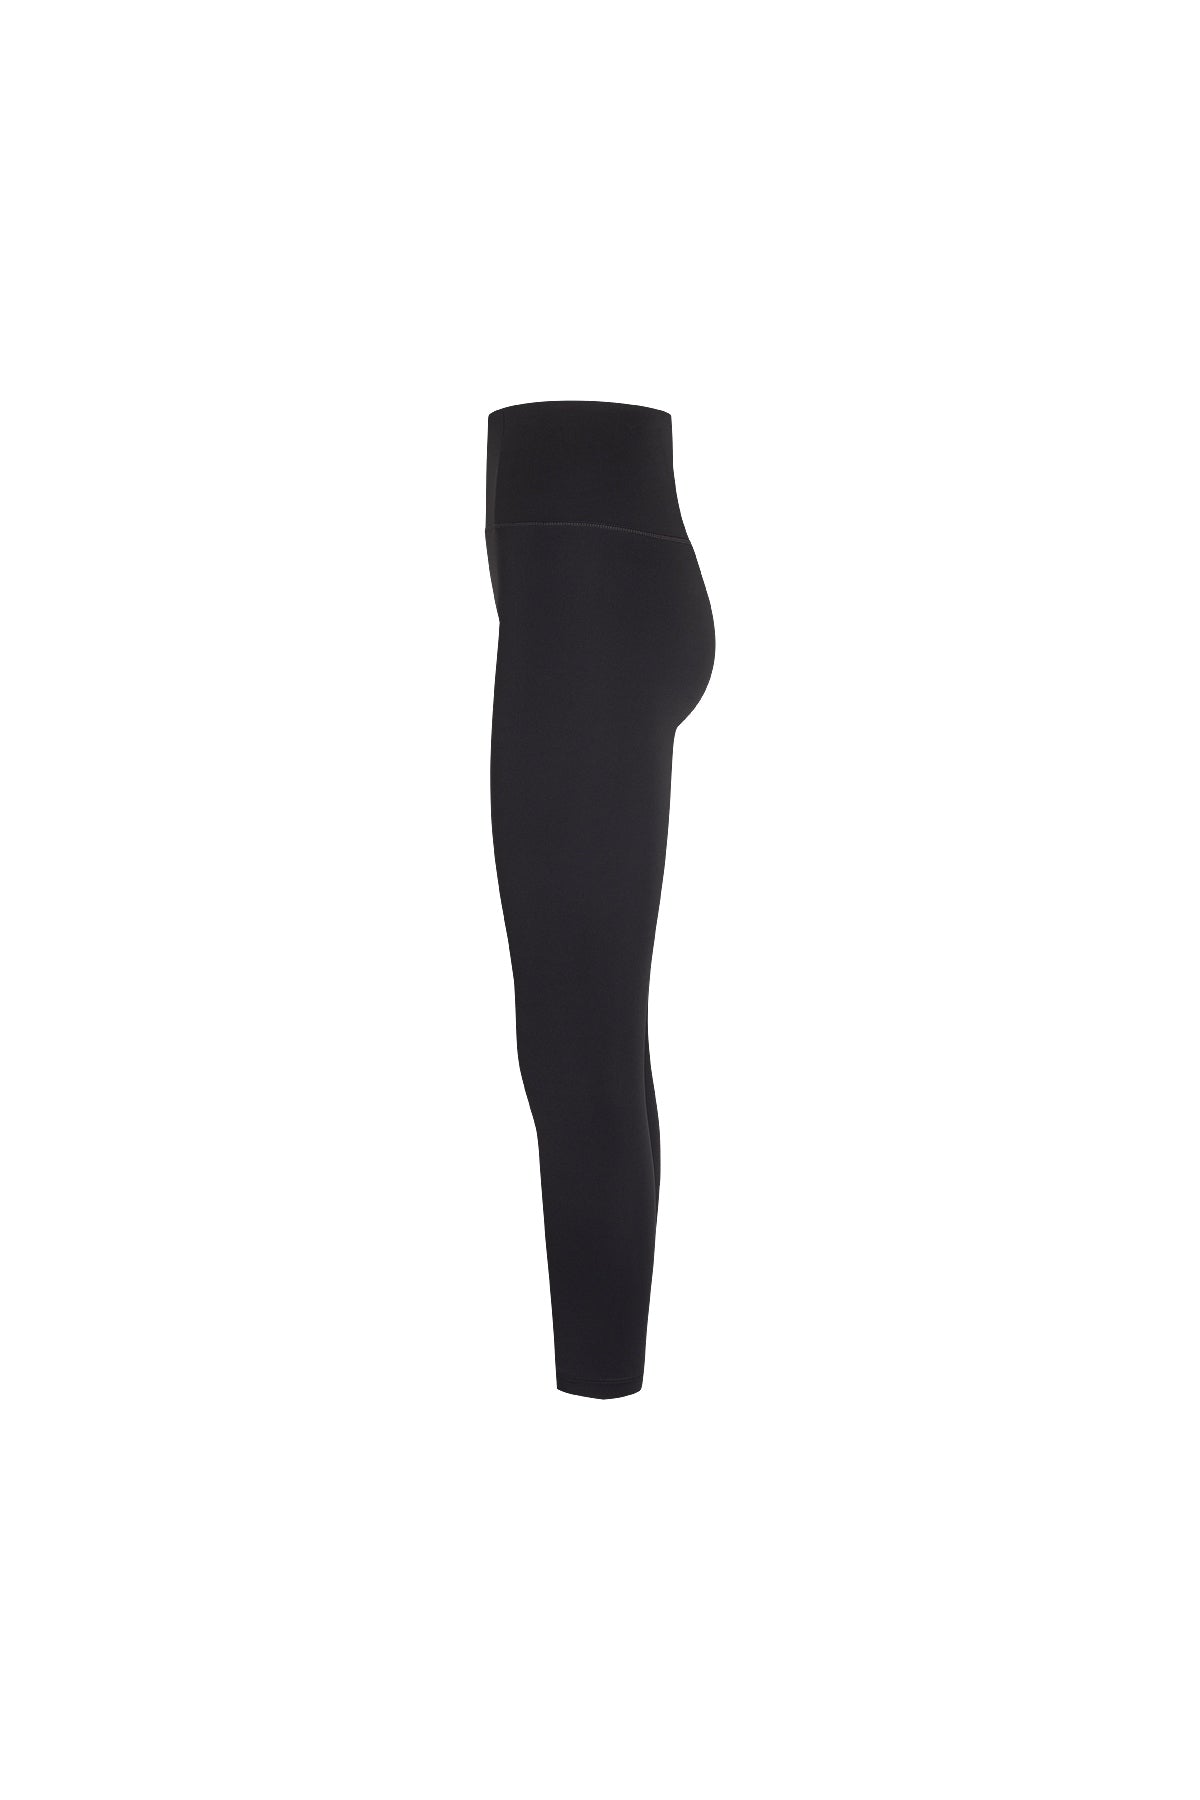 Girlfriend Collective Float Seamless High Rise Legging in Shadow